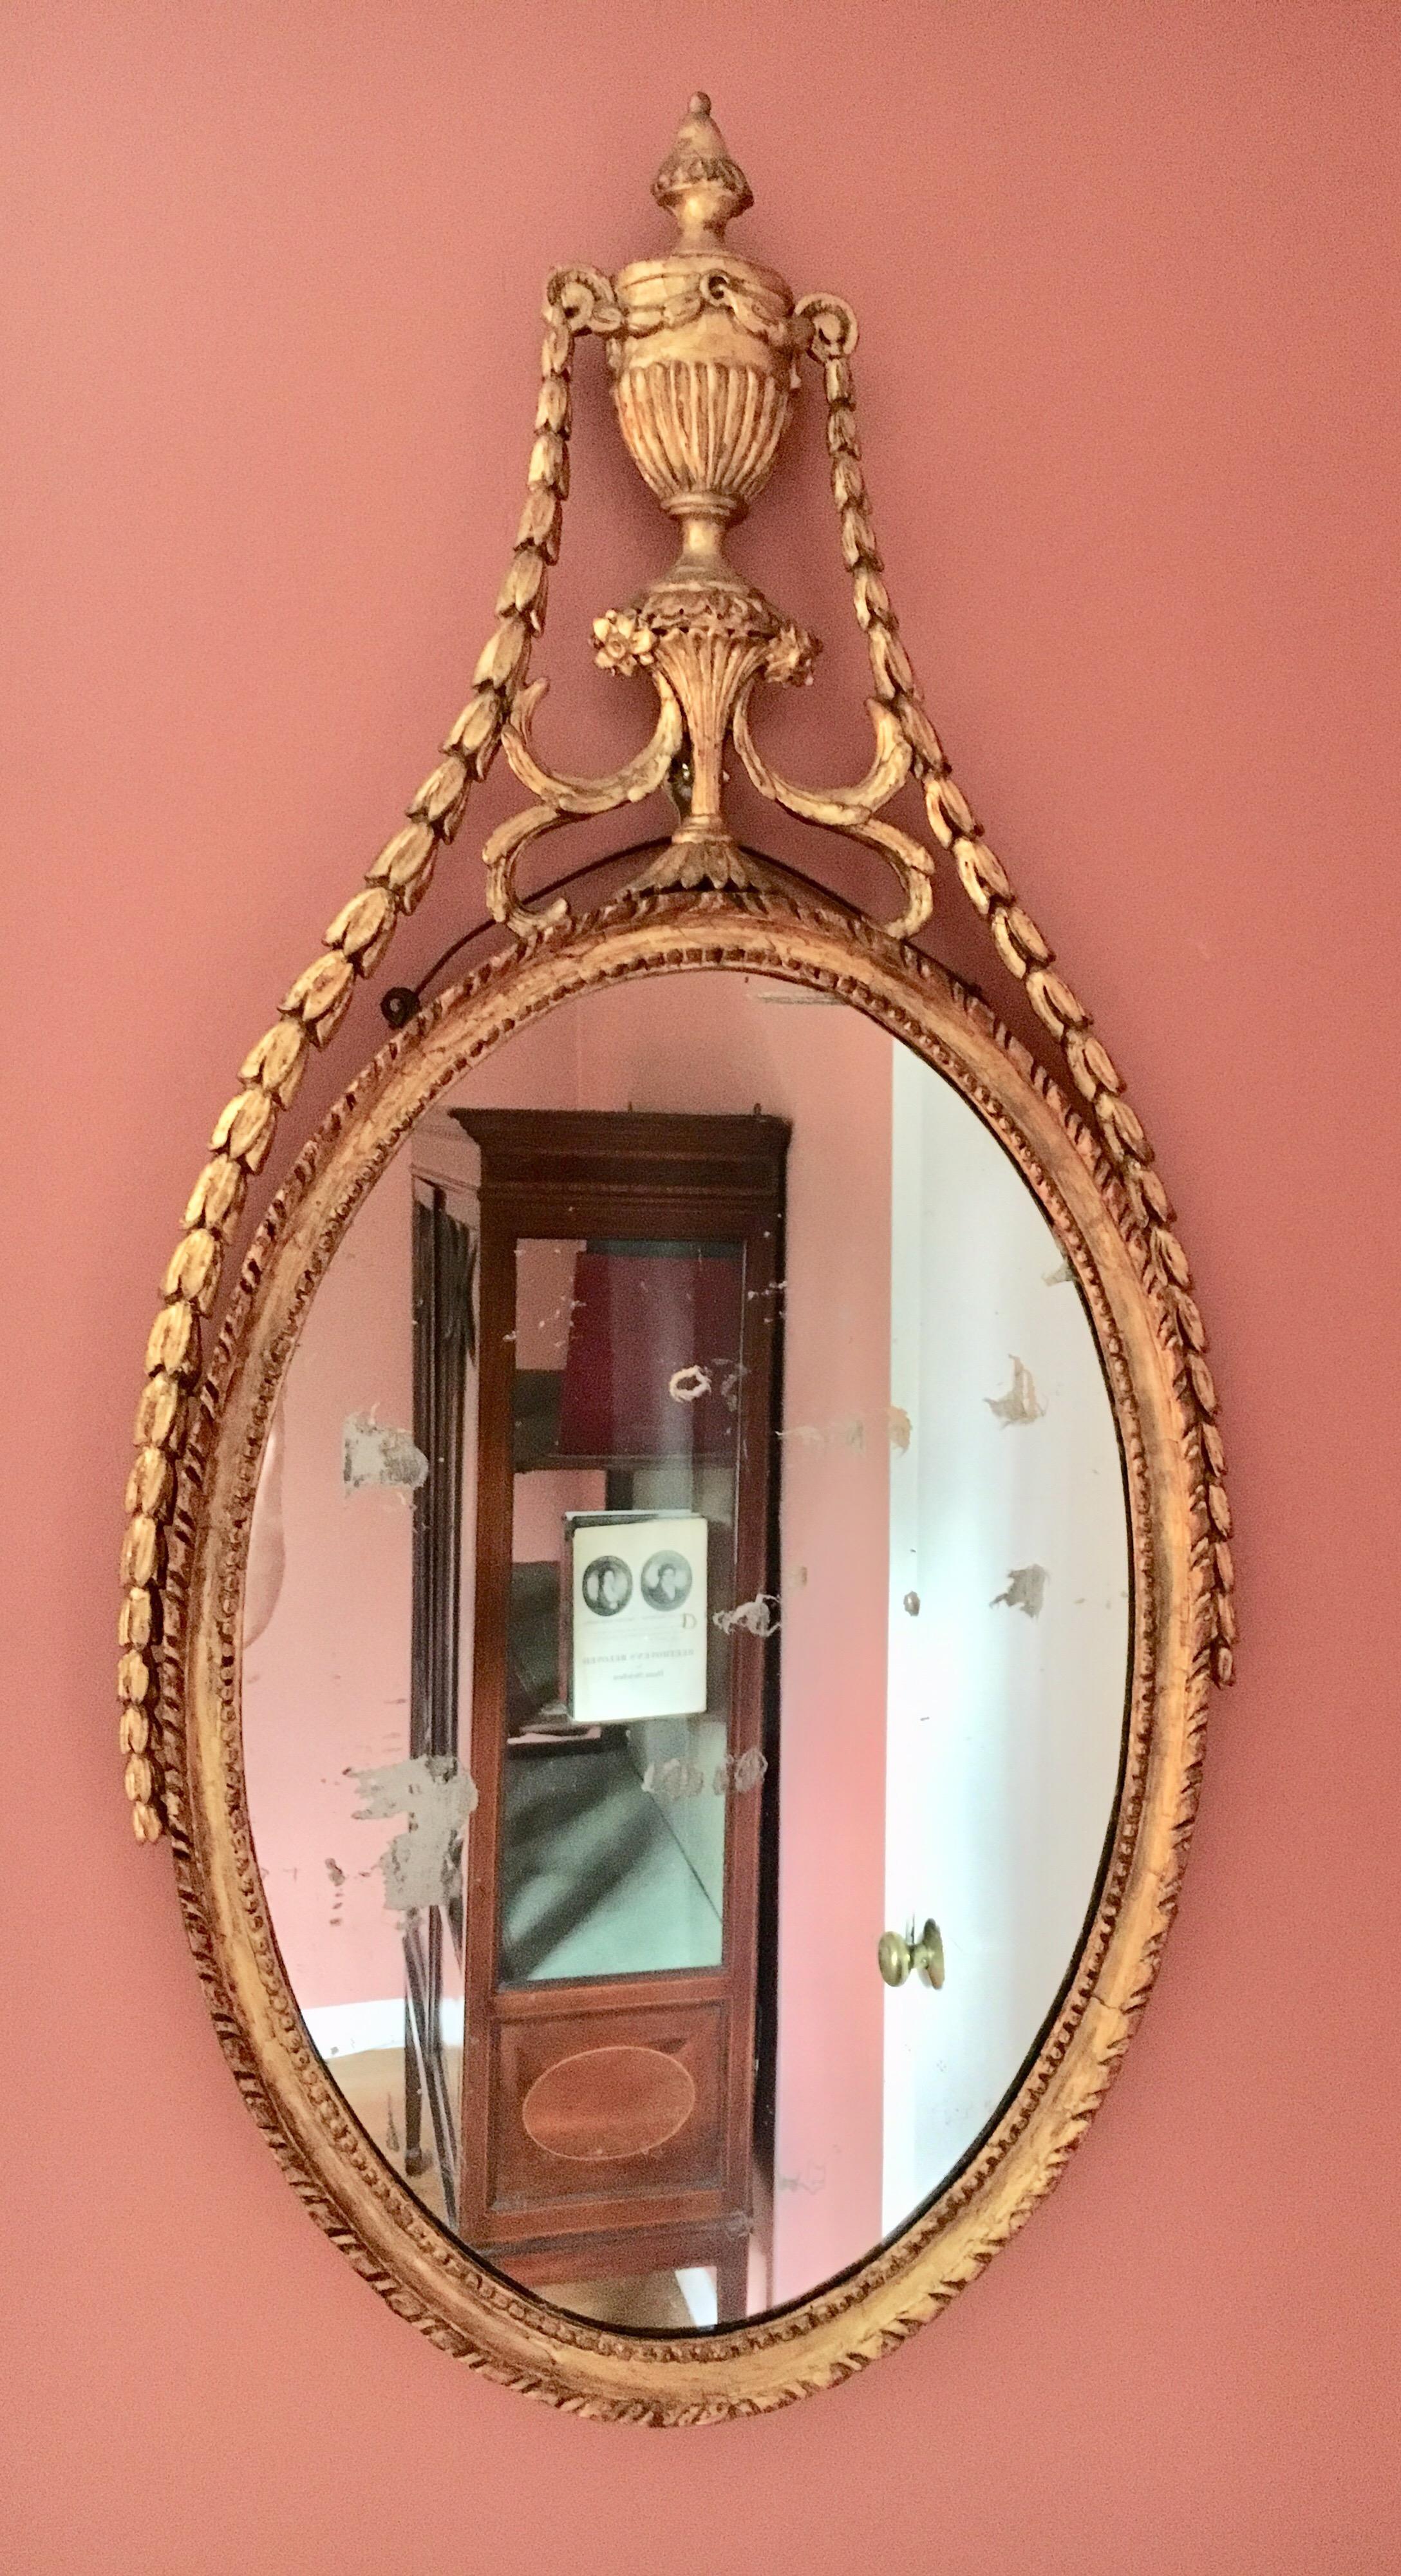 Beautiful antique late 18th century neoclassic oval gilt wall mirror in the manner of Robert Adam. Stunning and elegant, this 'Etruscan' style was not only popular in England in the late 18th century, but also made its way to the nobility in Denmark